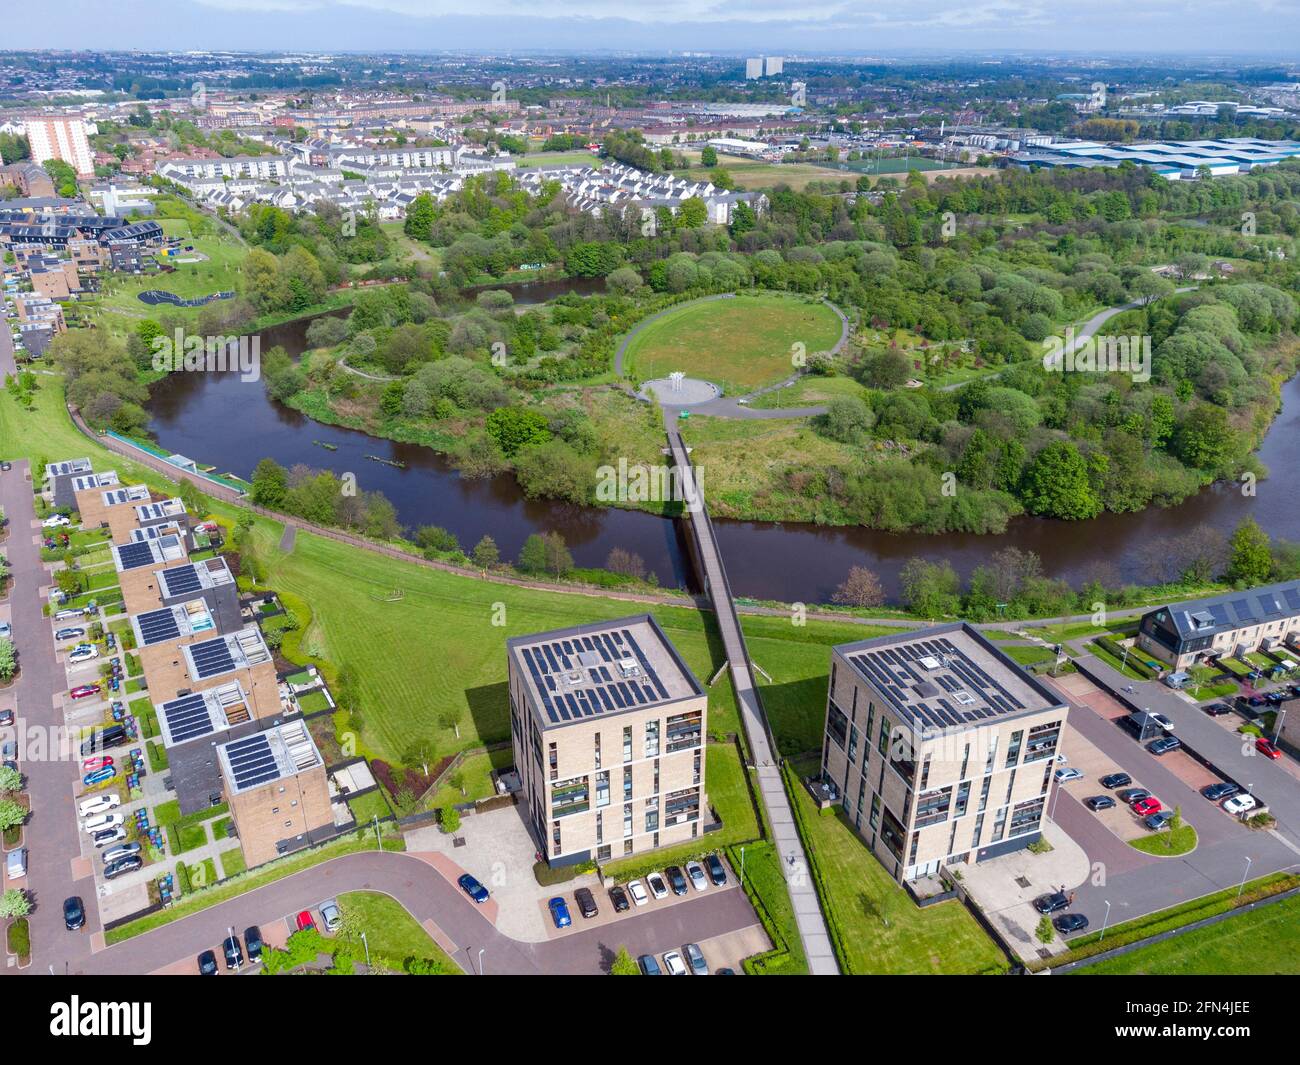 Aerial view of Cuningar Loop public woodland park and Athletes village modern housing  on banks of River Clyde at Rutherglen, Glasgow, Scotland, UK Stock Photo